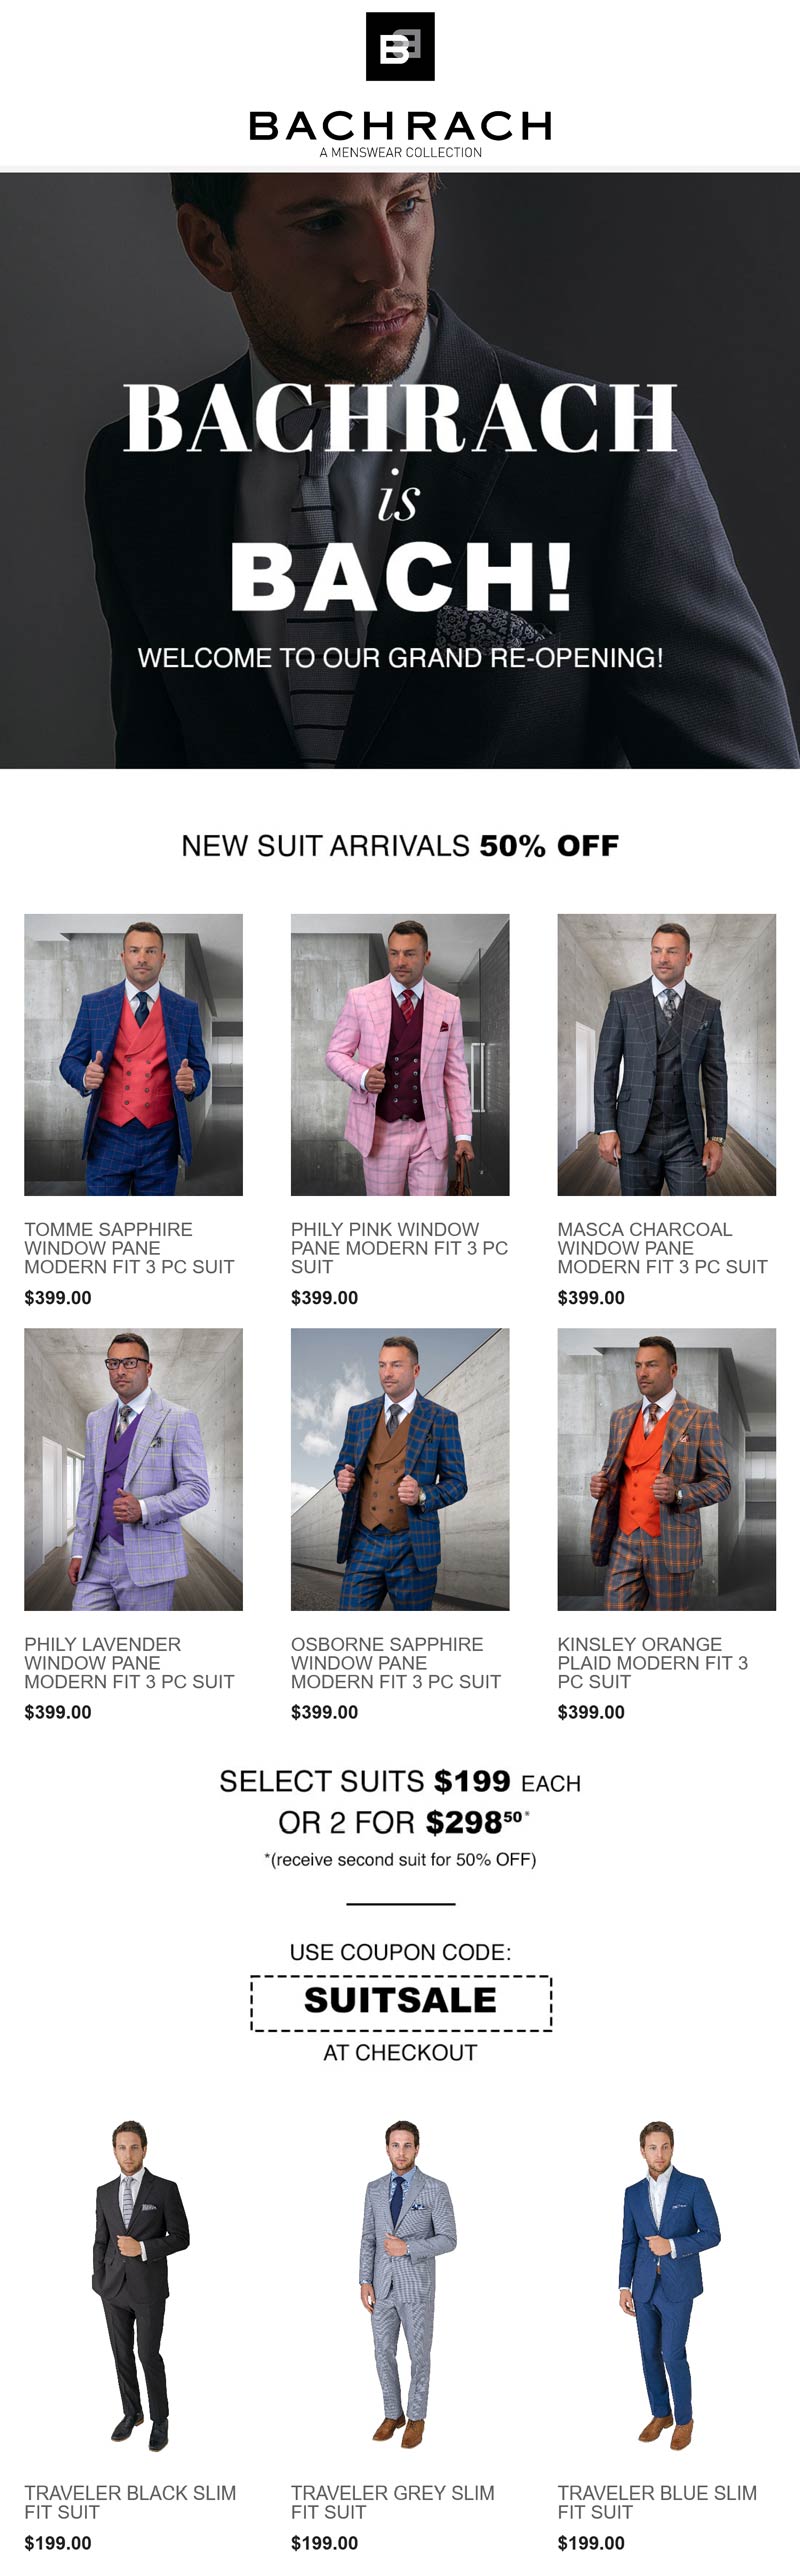 Bachrach stores Coupon  2 suits for $299 & more at Bachrach via promo code SUITSALE #bachrach 